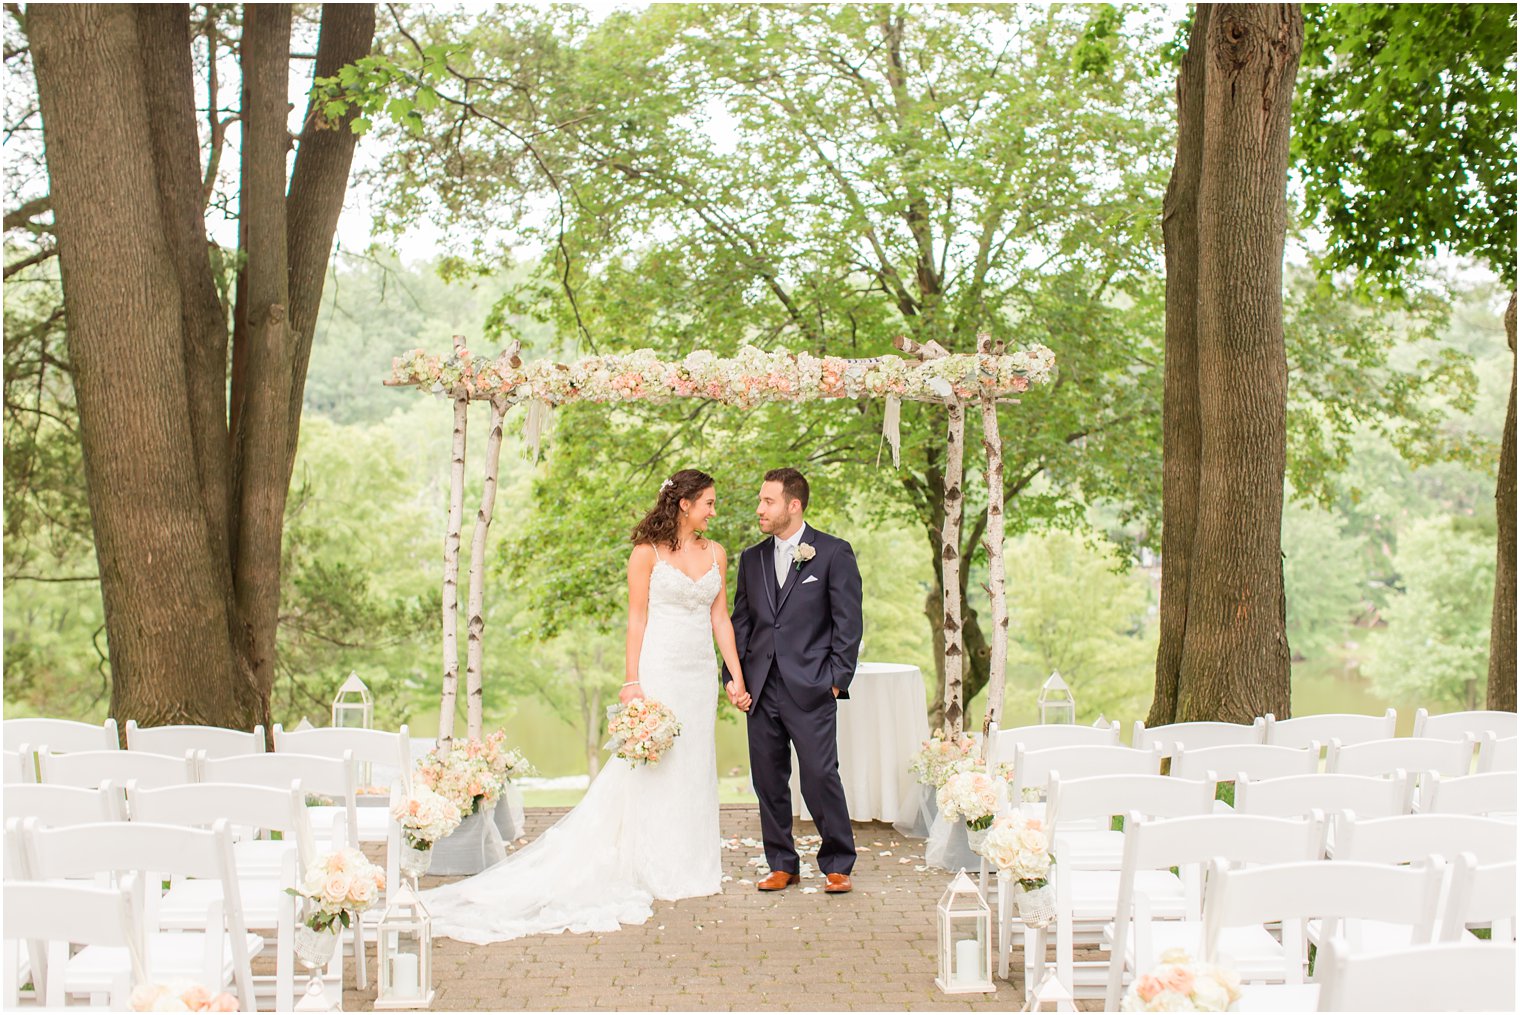 Bride and groom under the chuppah